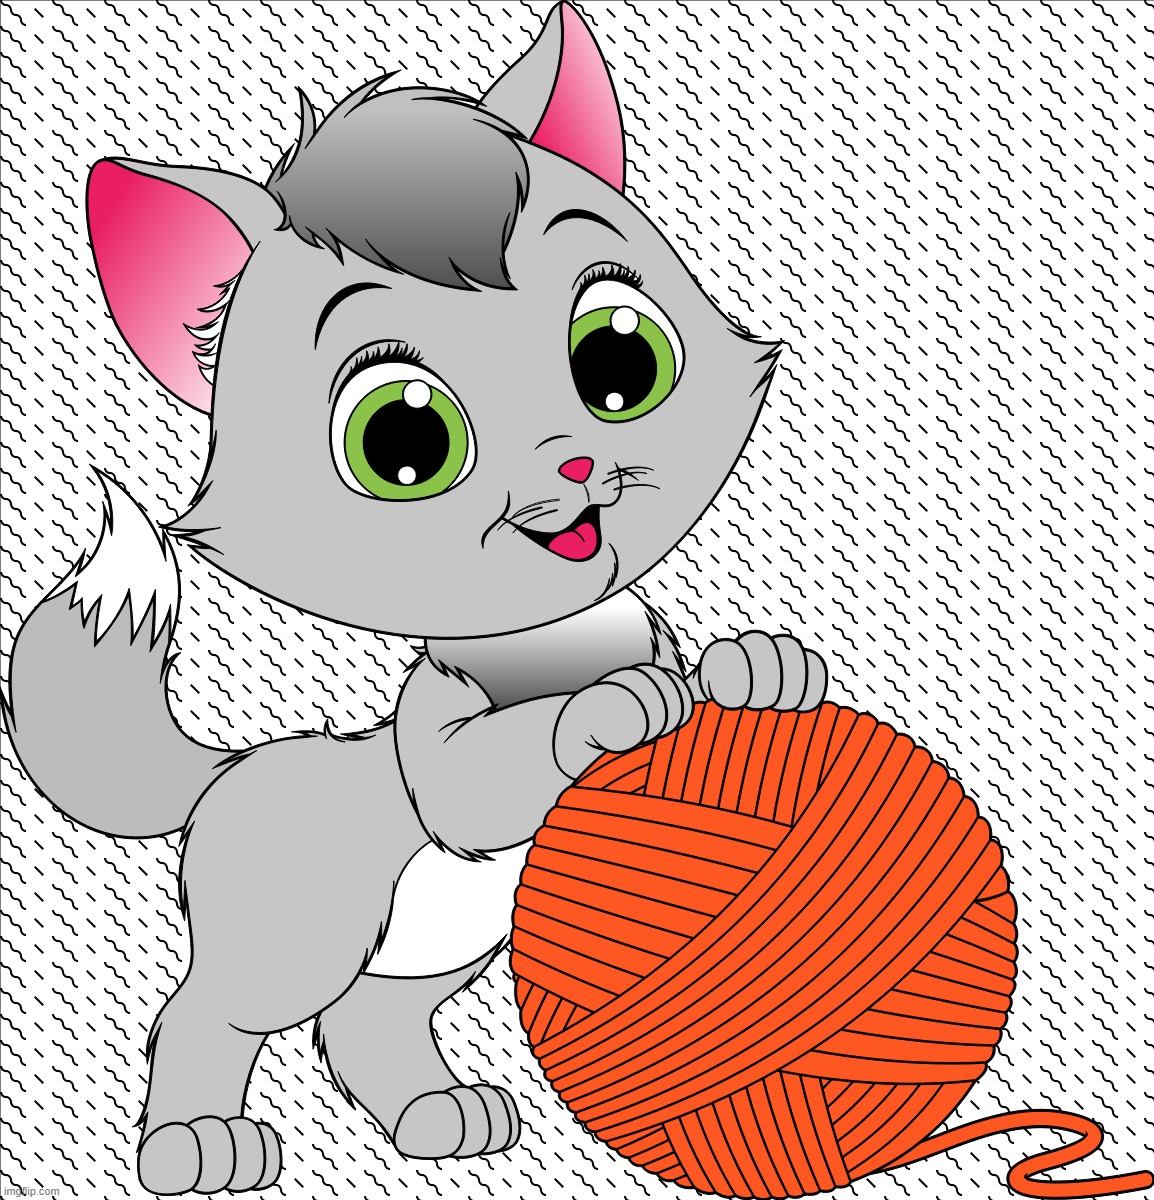 "My first time using gradients on my art, Here's some adorable cat" | image tagged in cat,art | made w/ Imgflip meme maker